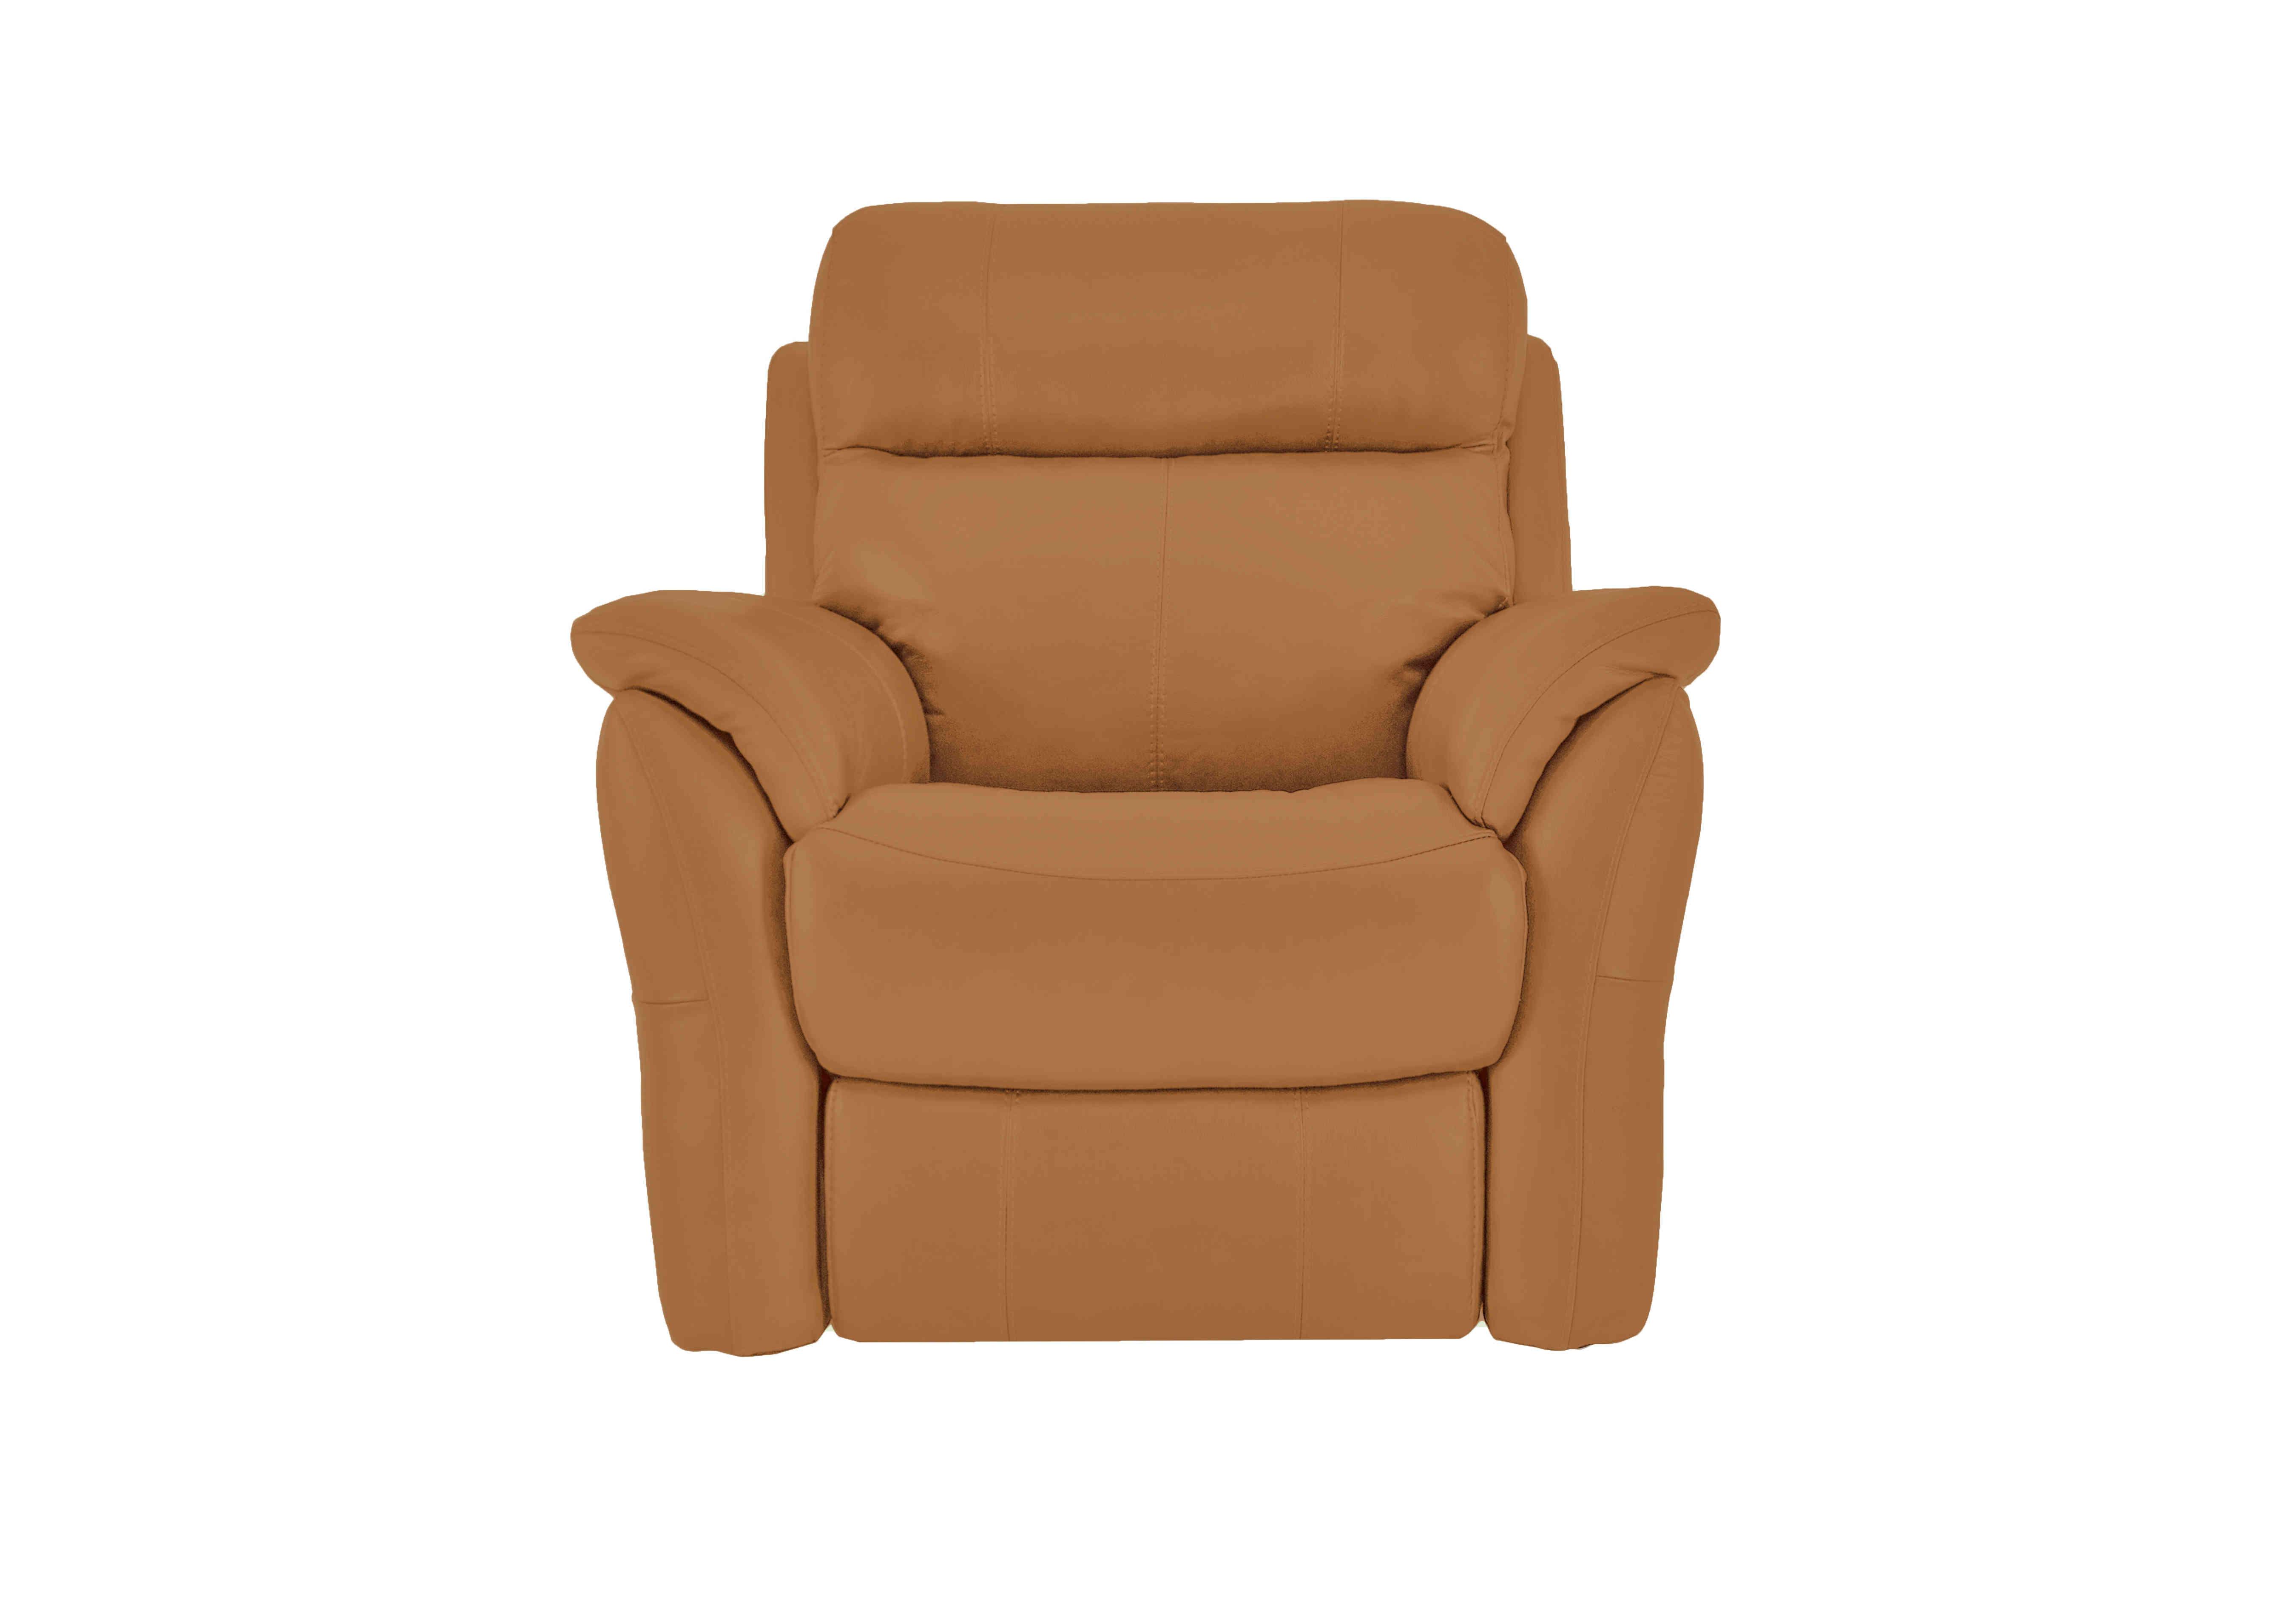 Relax Station Revive Leather Armchair in Bv-335e Honey Yellow on Furniture Village